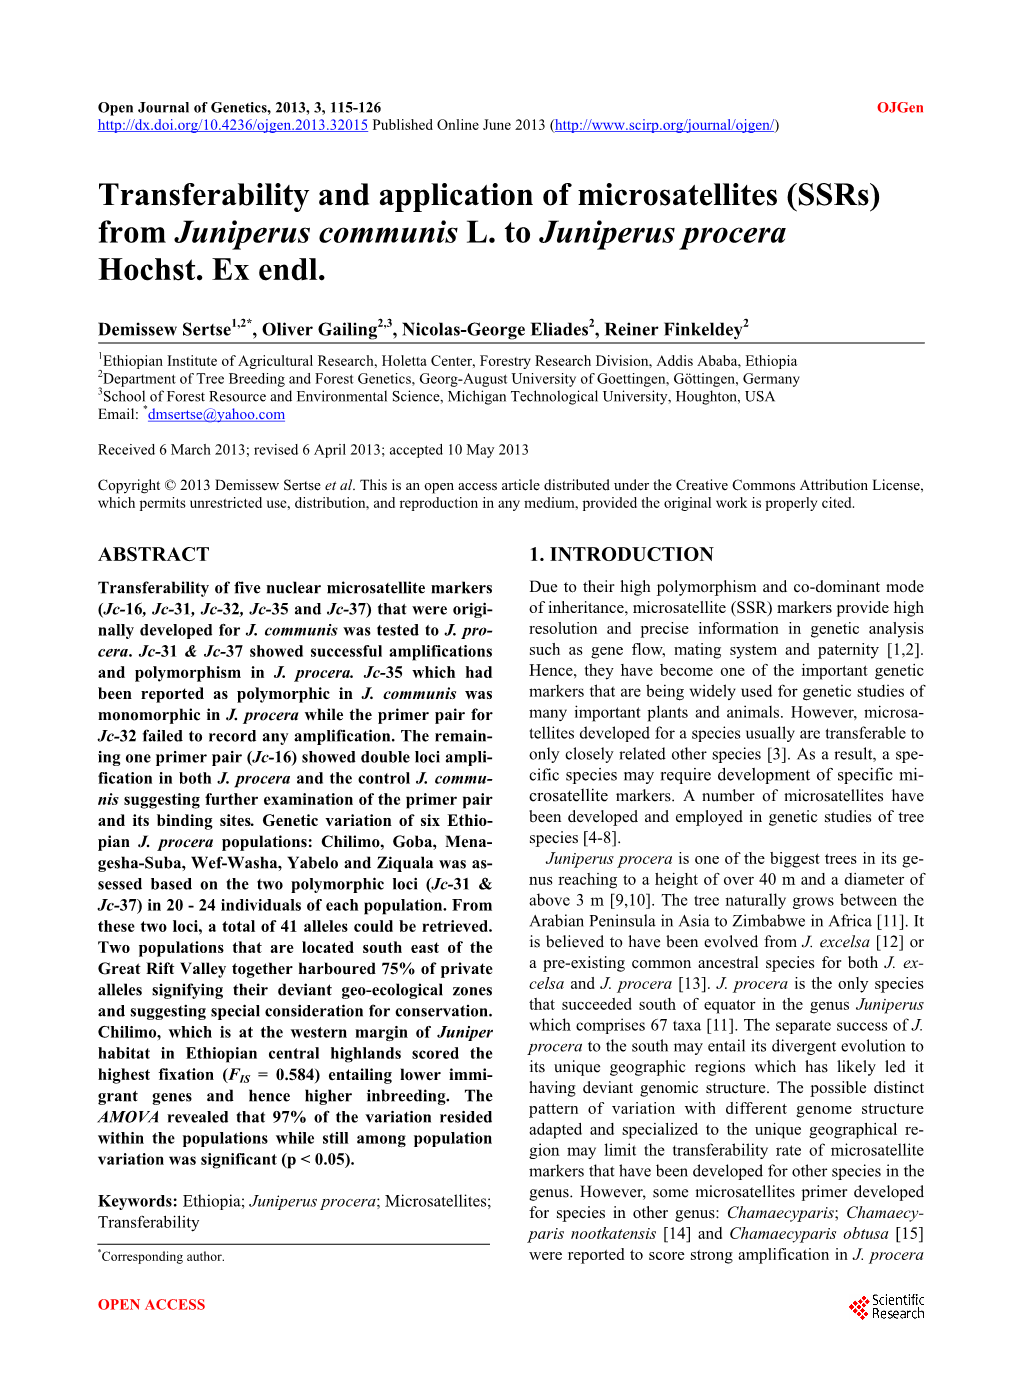 Transferability and Application of Microsatellites (Ssrs) from Juniperus Communis L